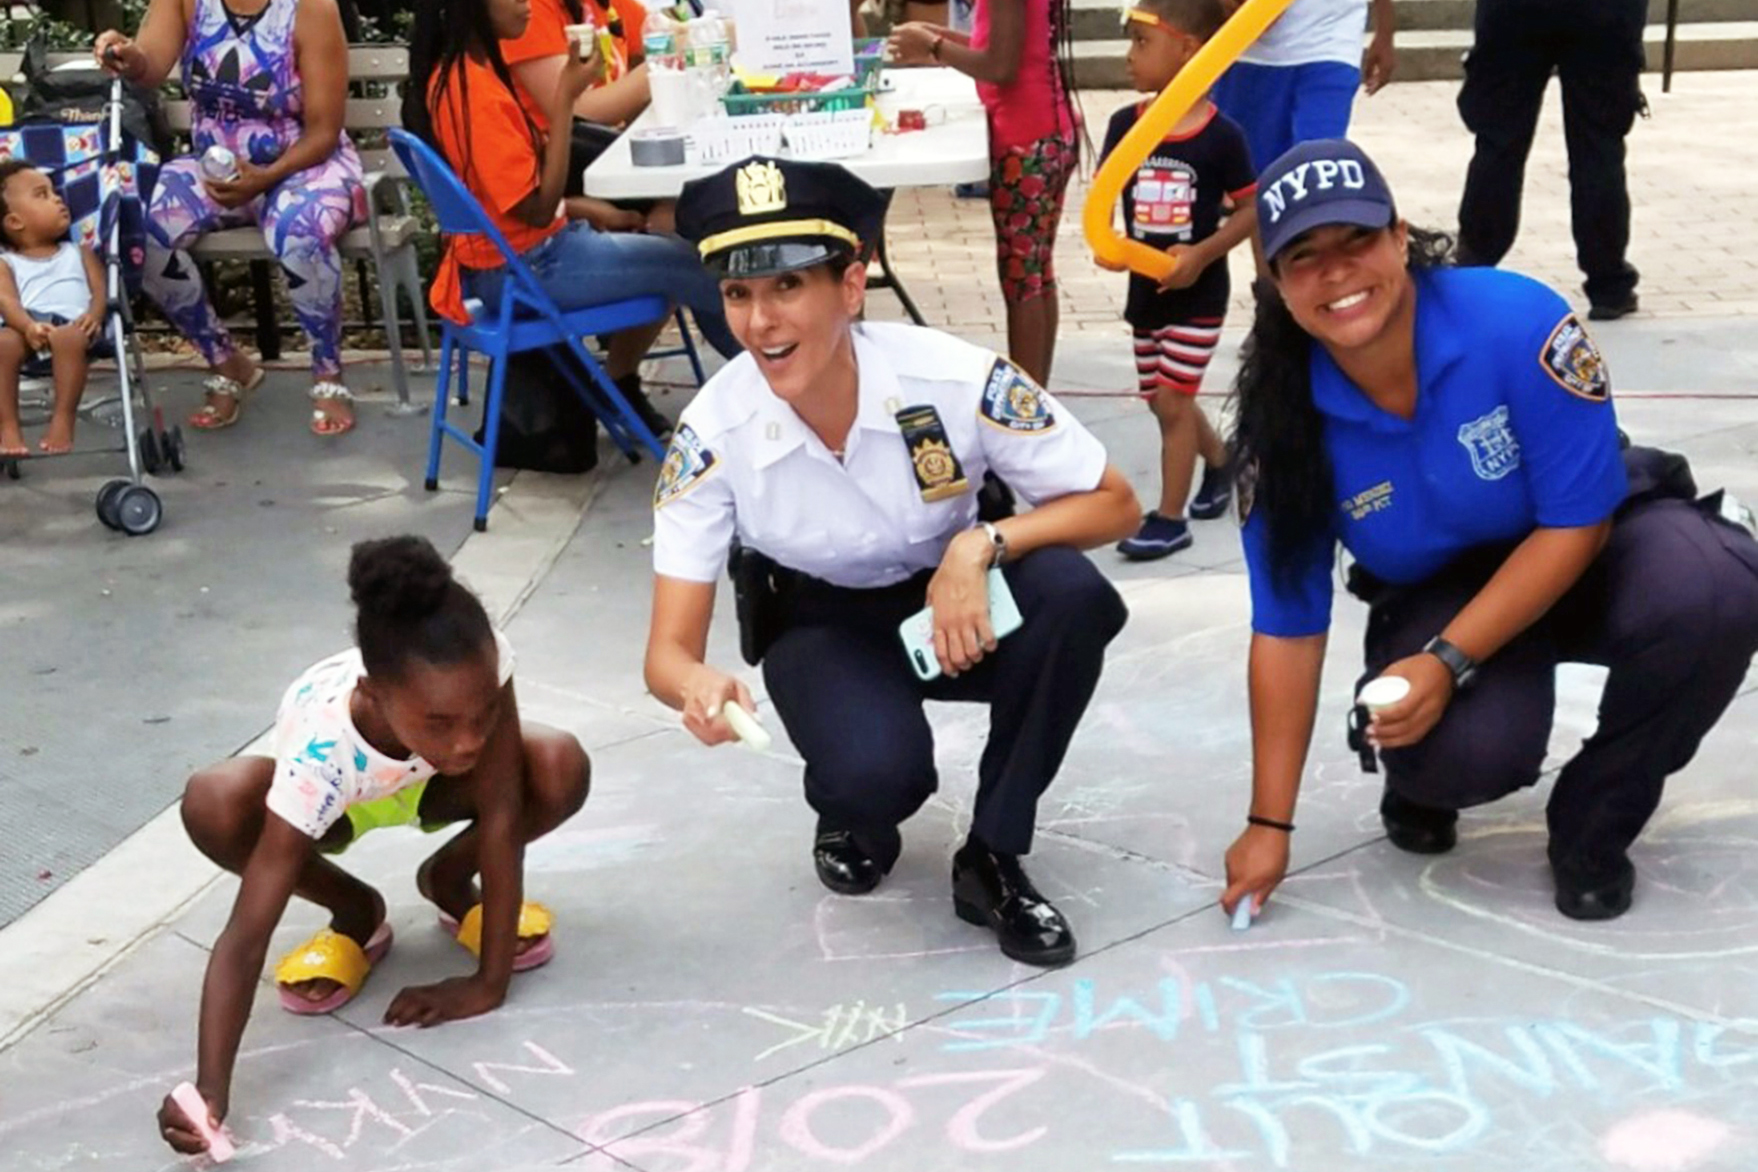 Police officers participating in a community event